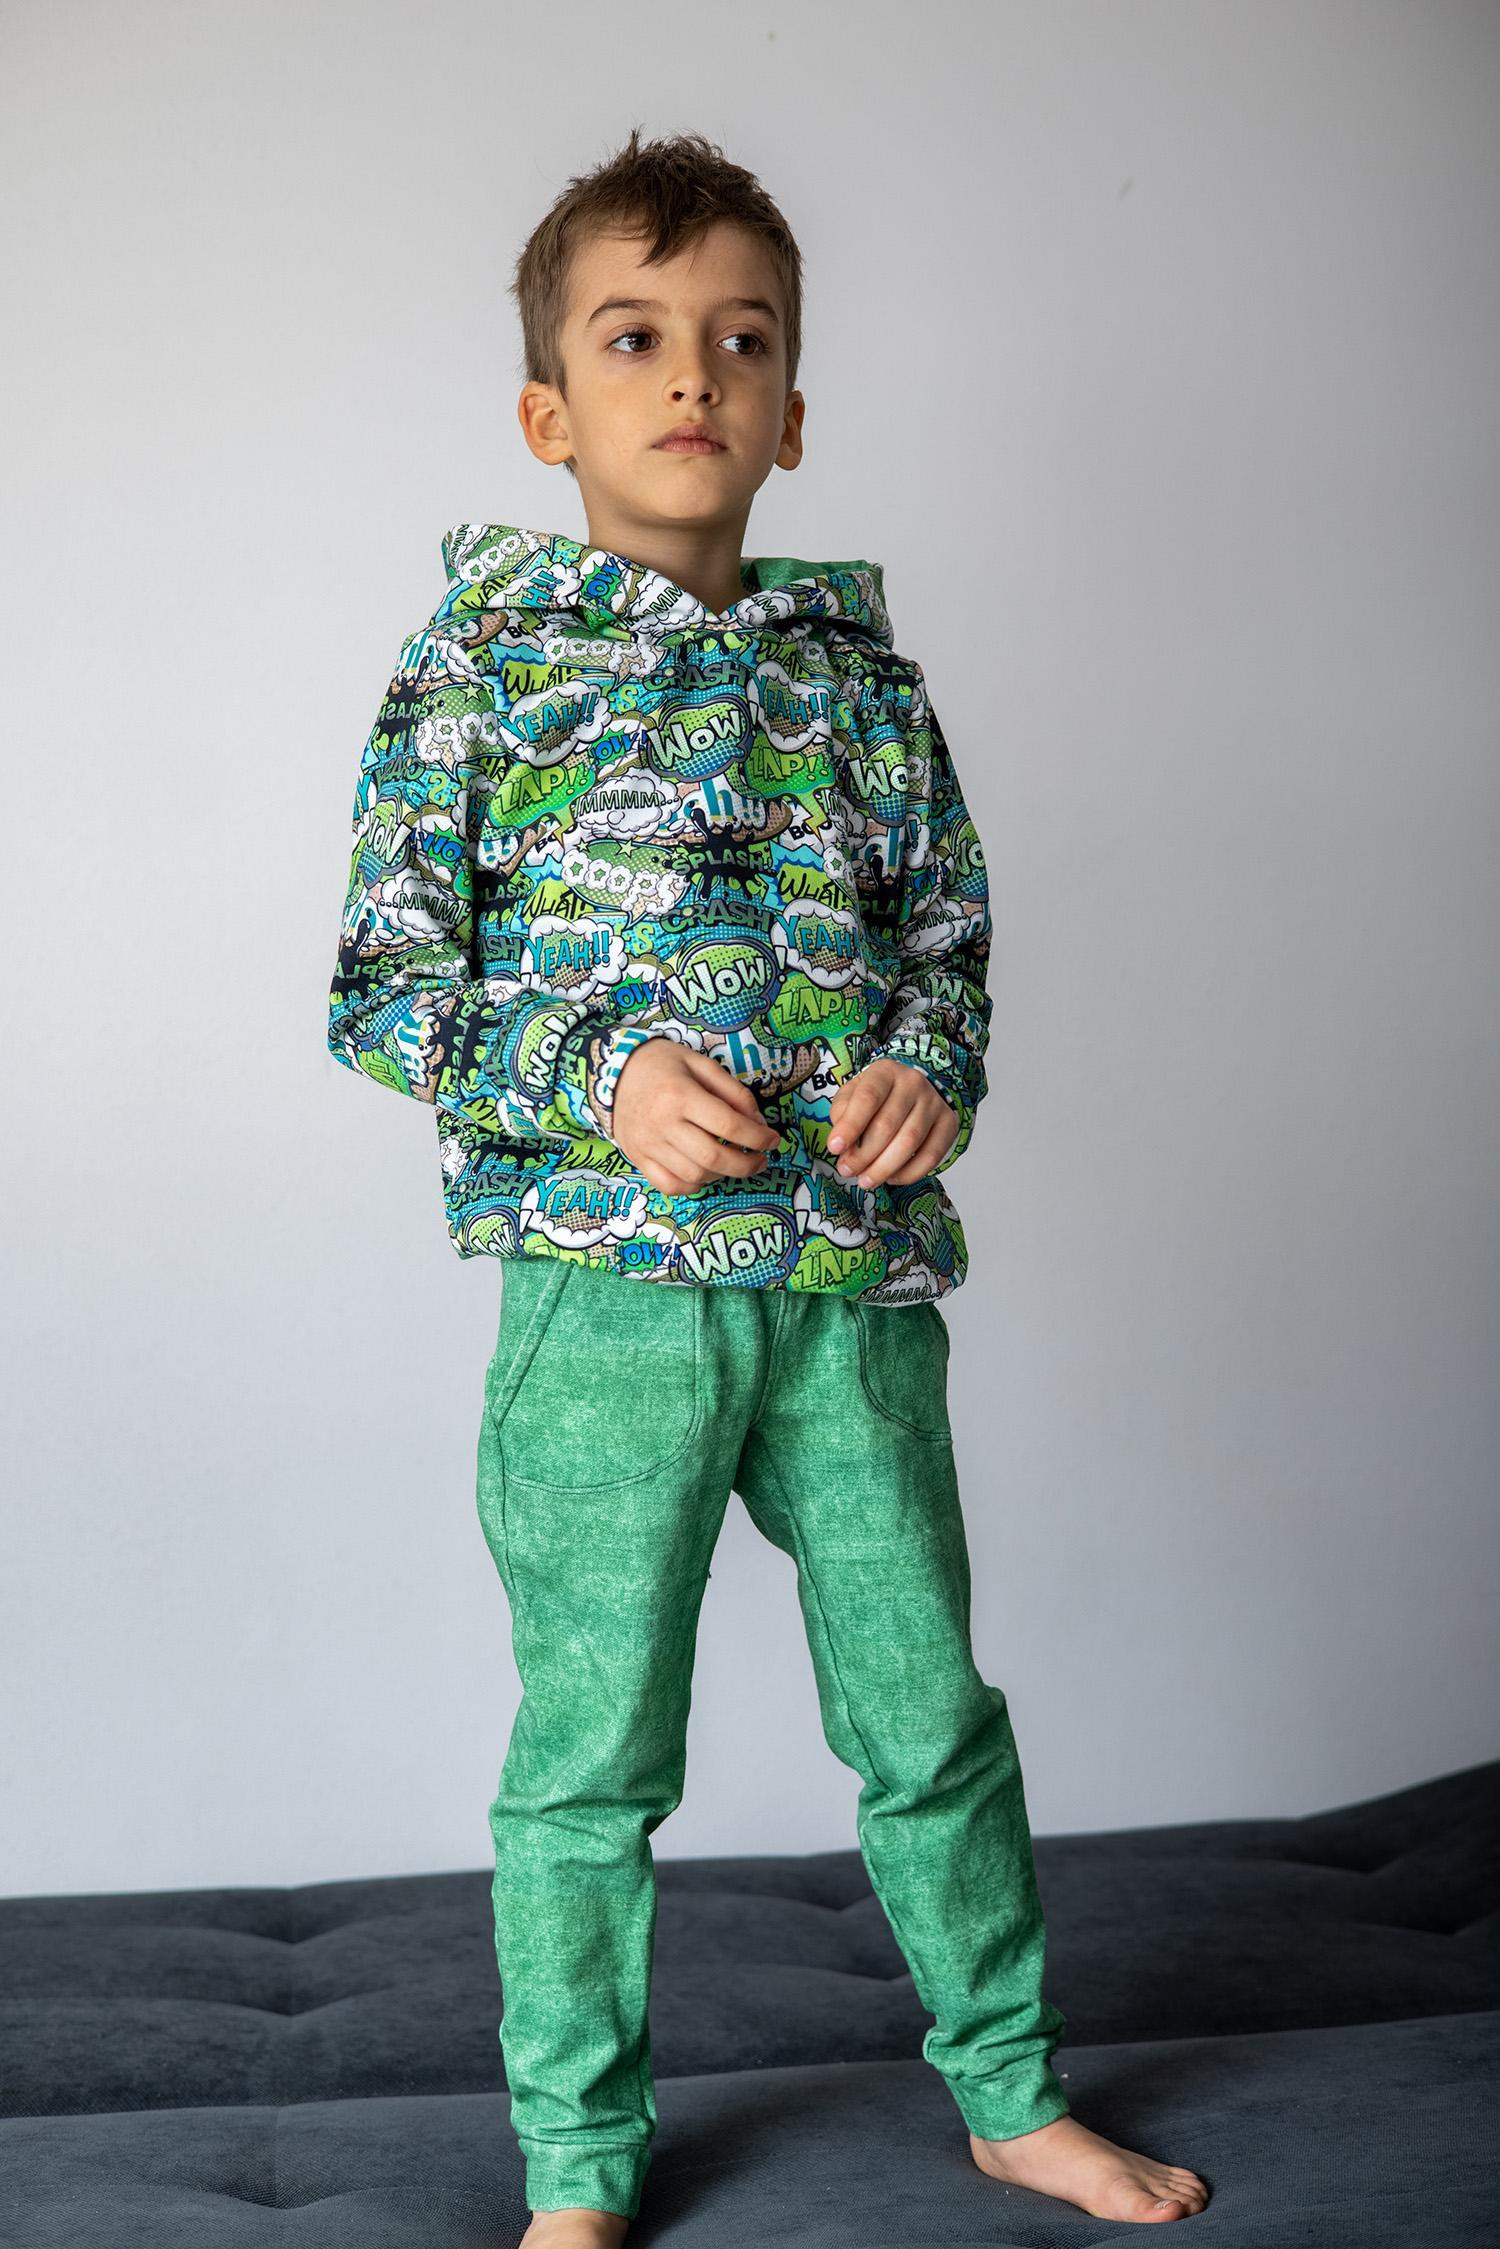 Children's tracksuit (OSLO) - LIGHT RAYS - sewing set